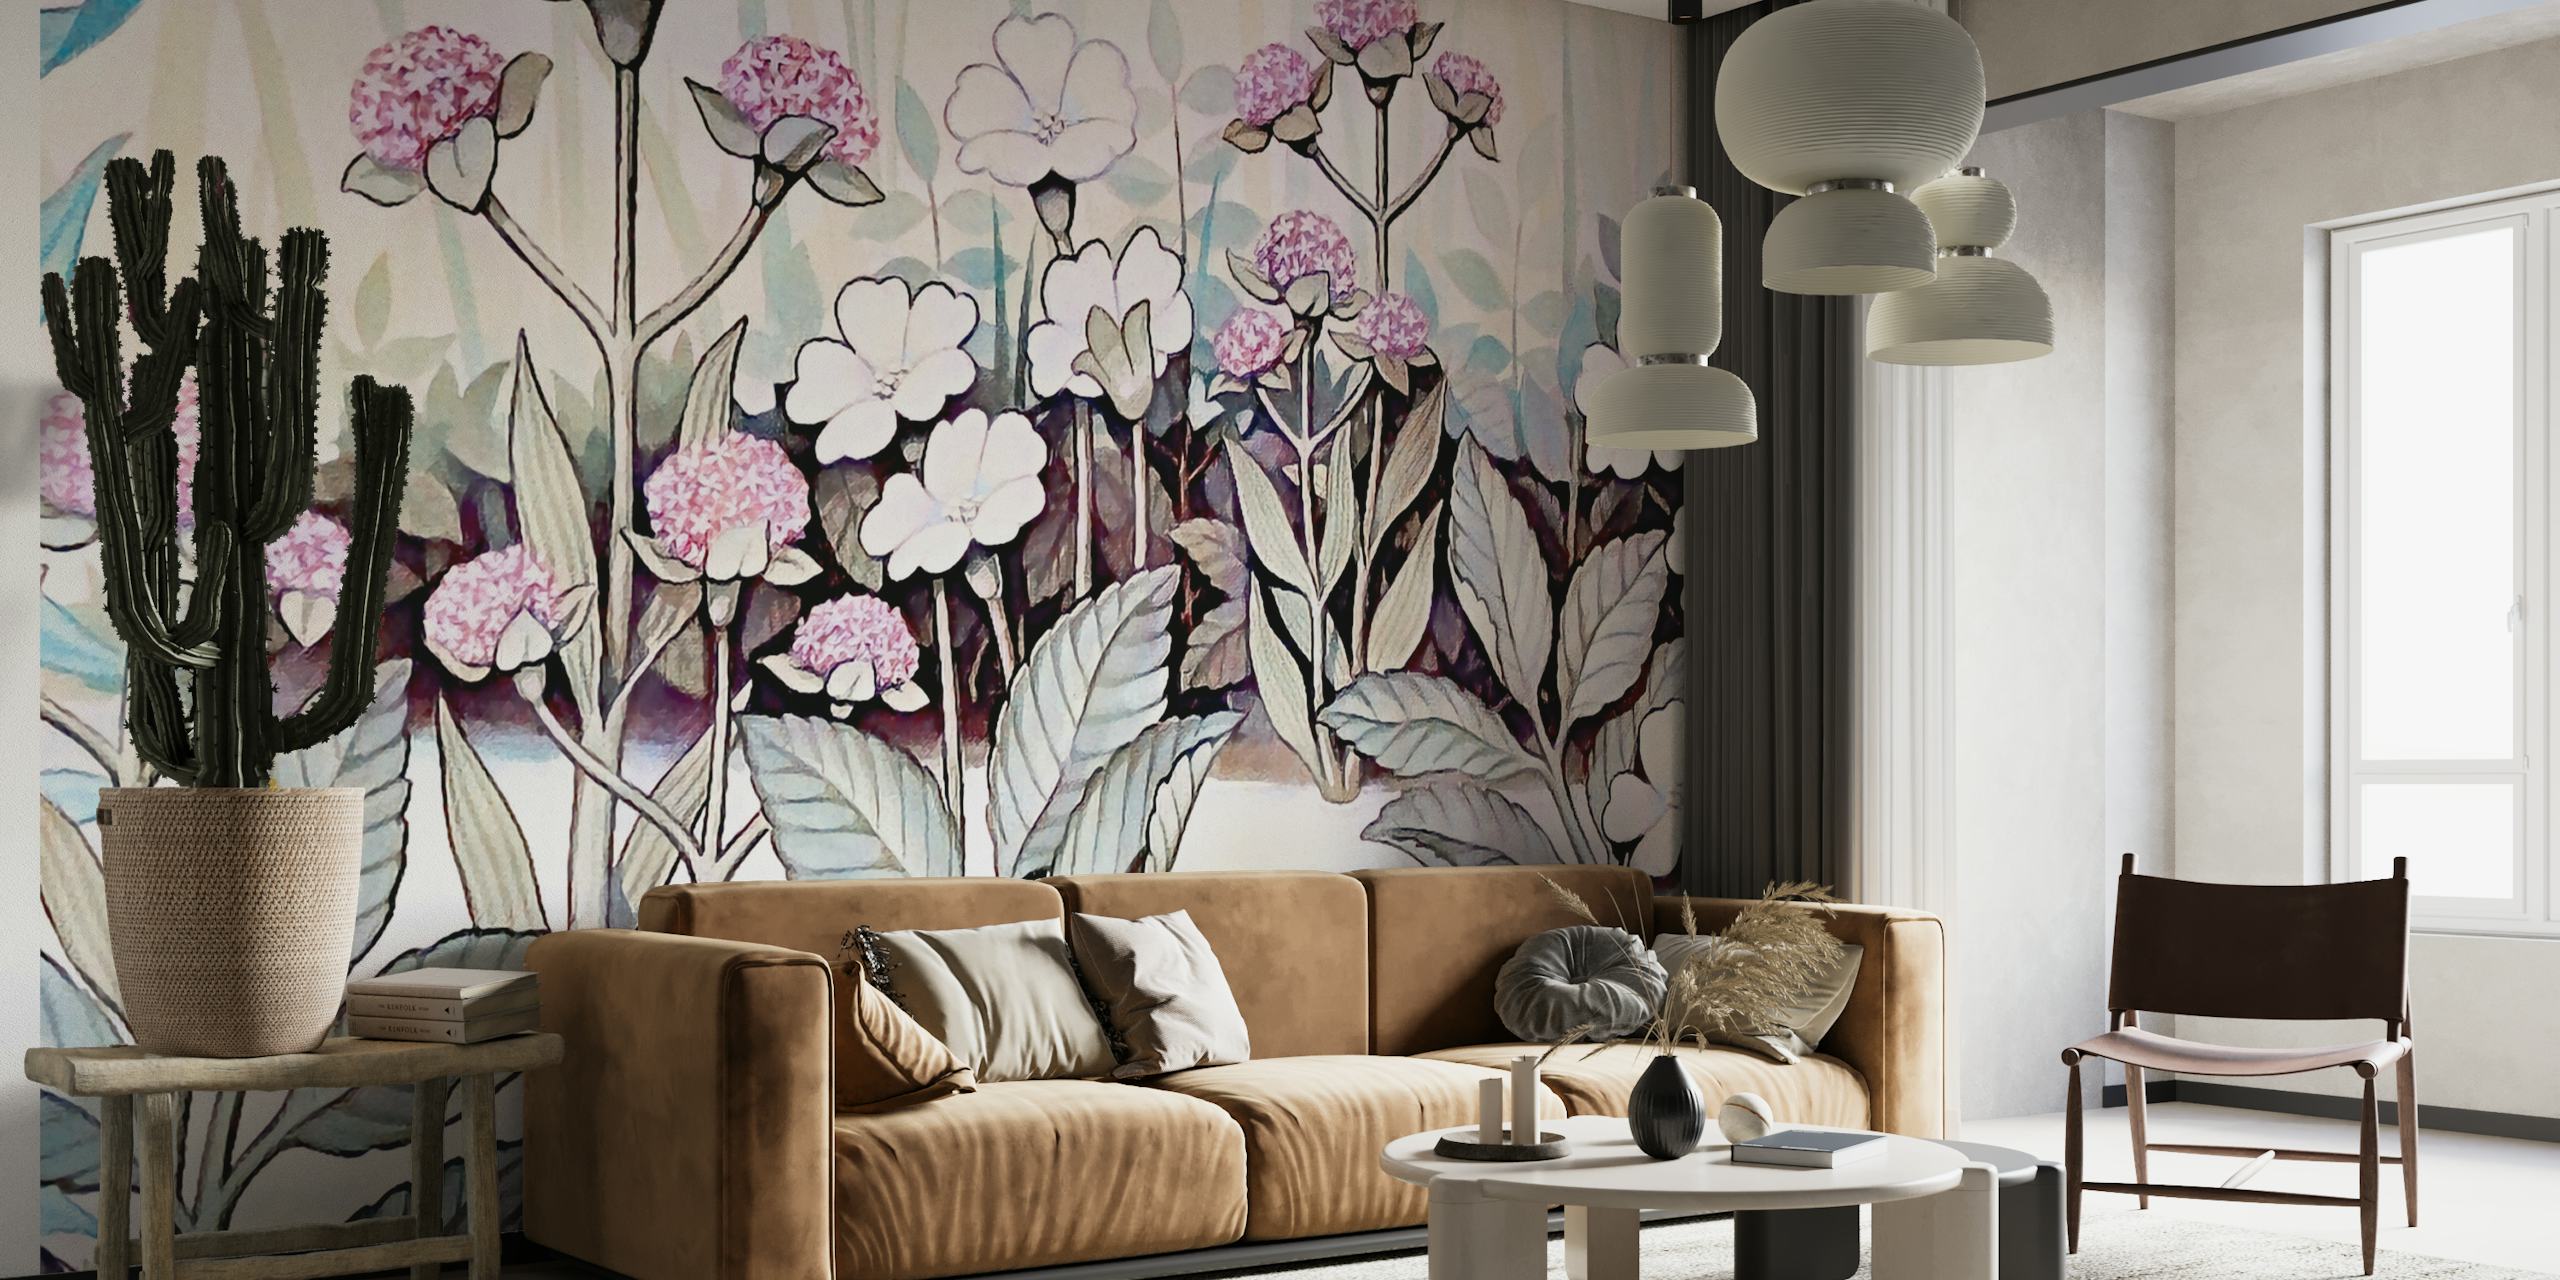 Watercolor wall mural with a frog and floral design